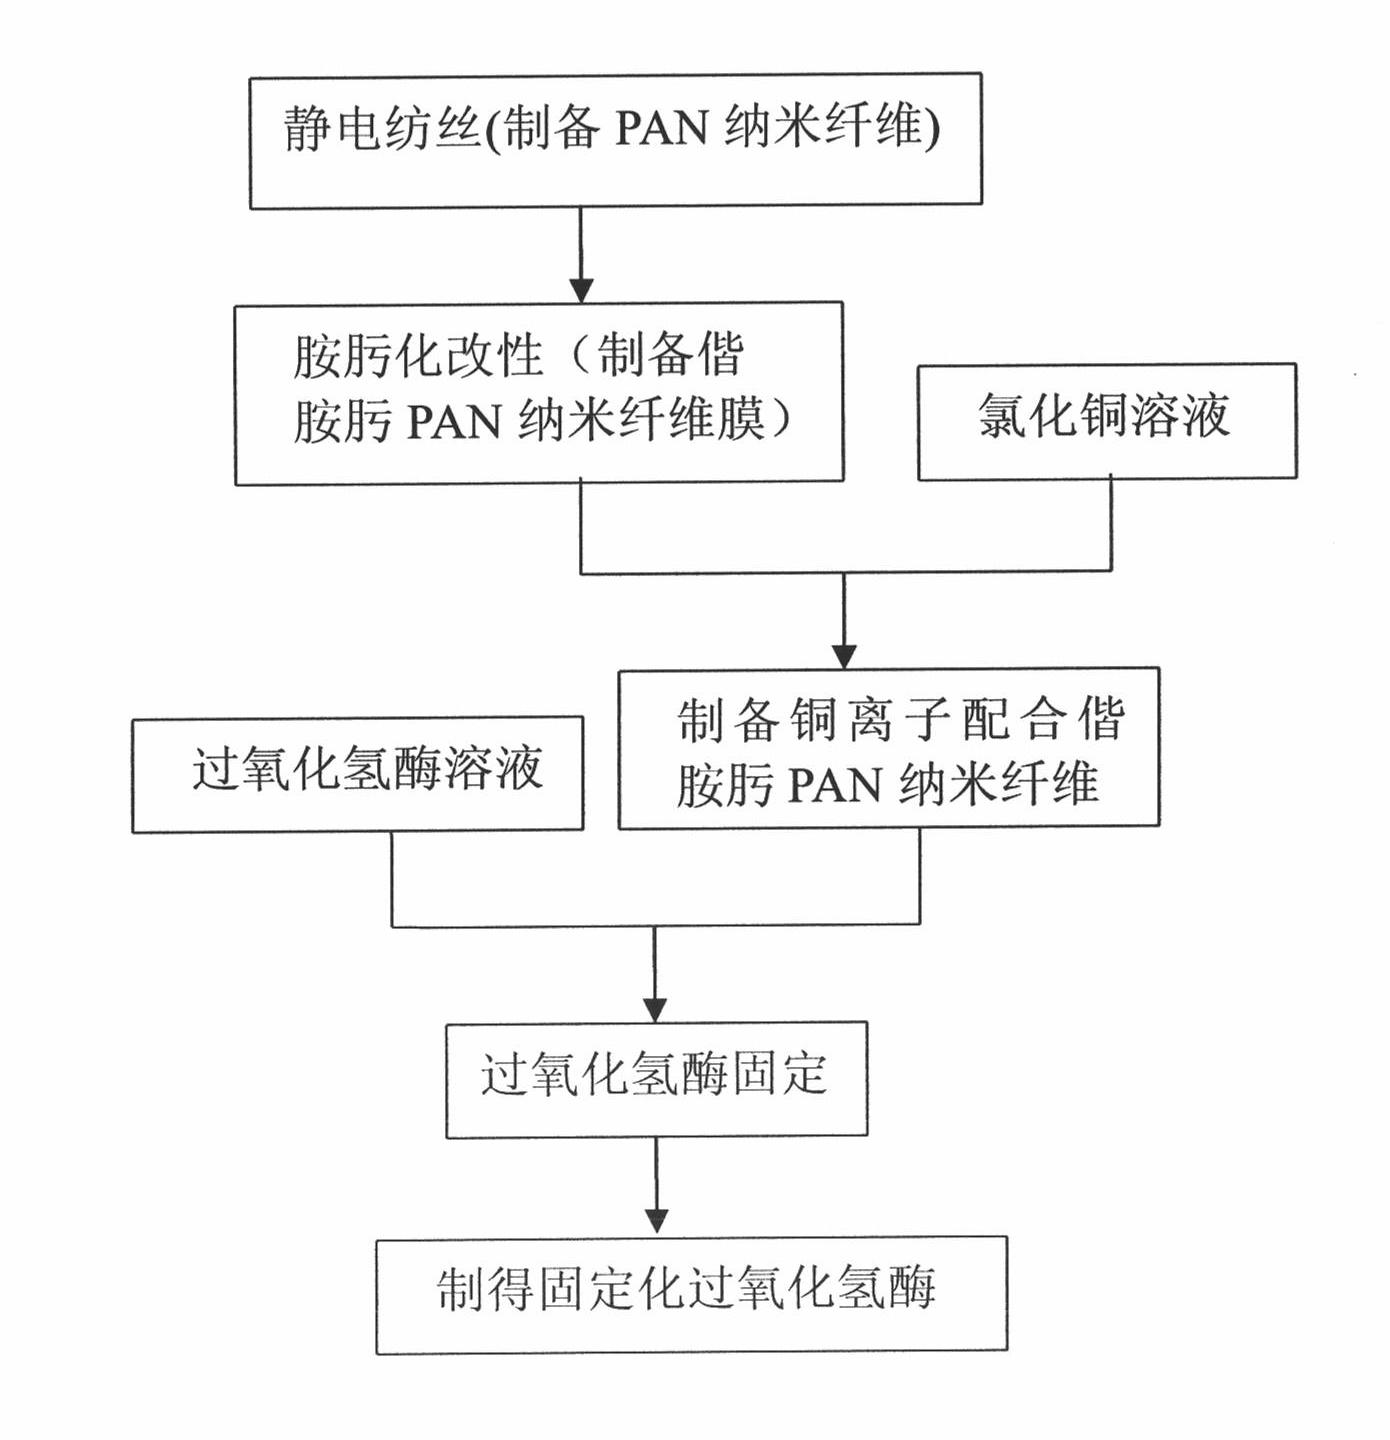 Catalase immobilization method on basis of using amidoxime PAN nanofibrous membrane as carrier